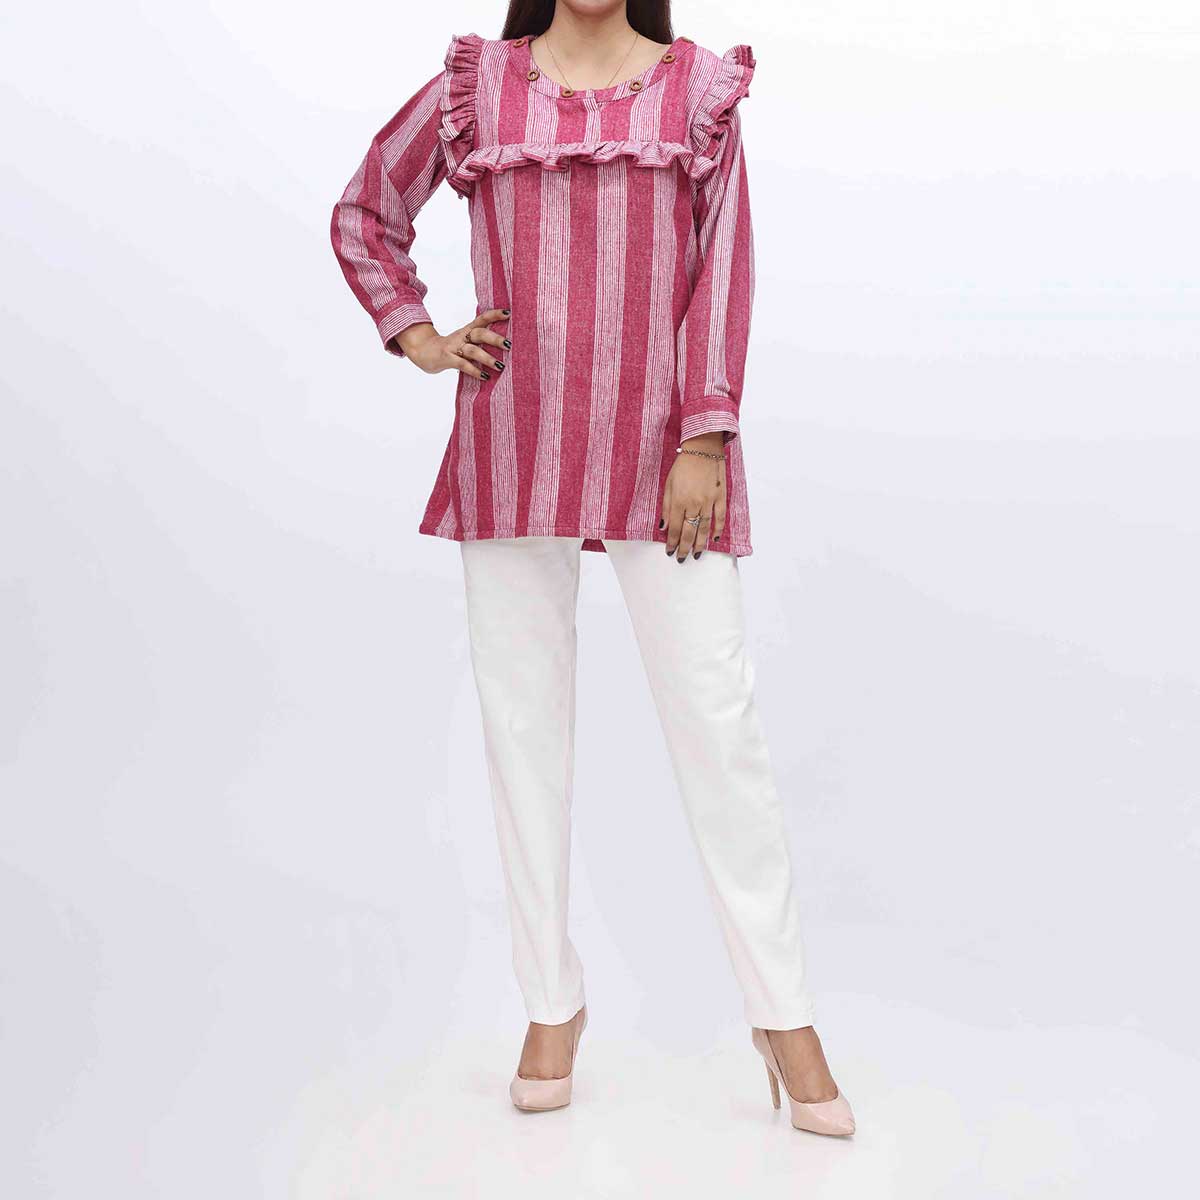 1PC- Flannel Checkered Top PW3183